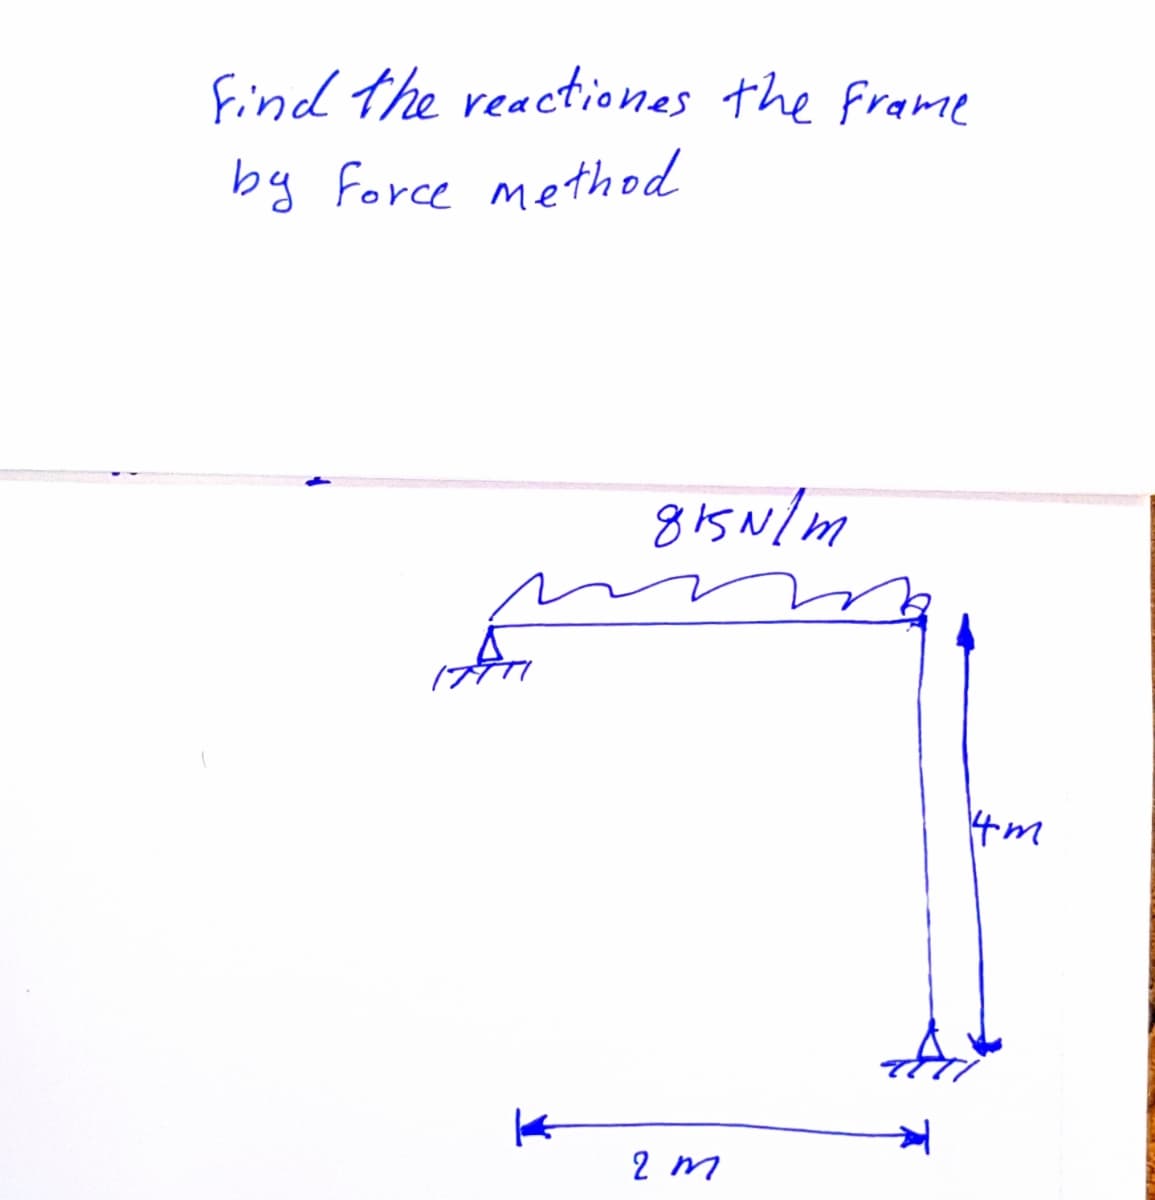 Find the reactiones the frame
by force method
815N/m
ATI
K
2m
4m